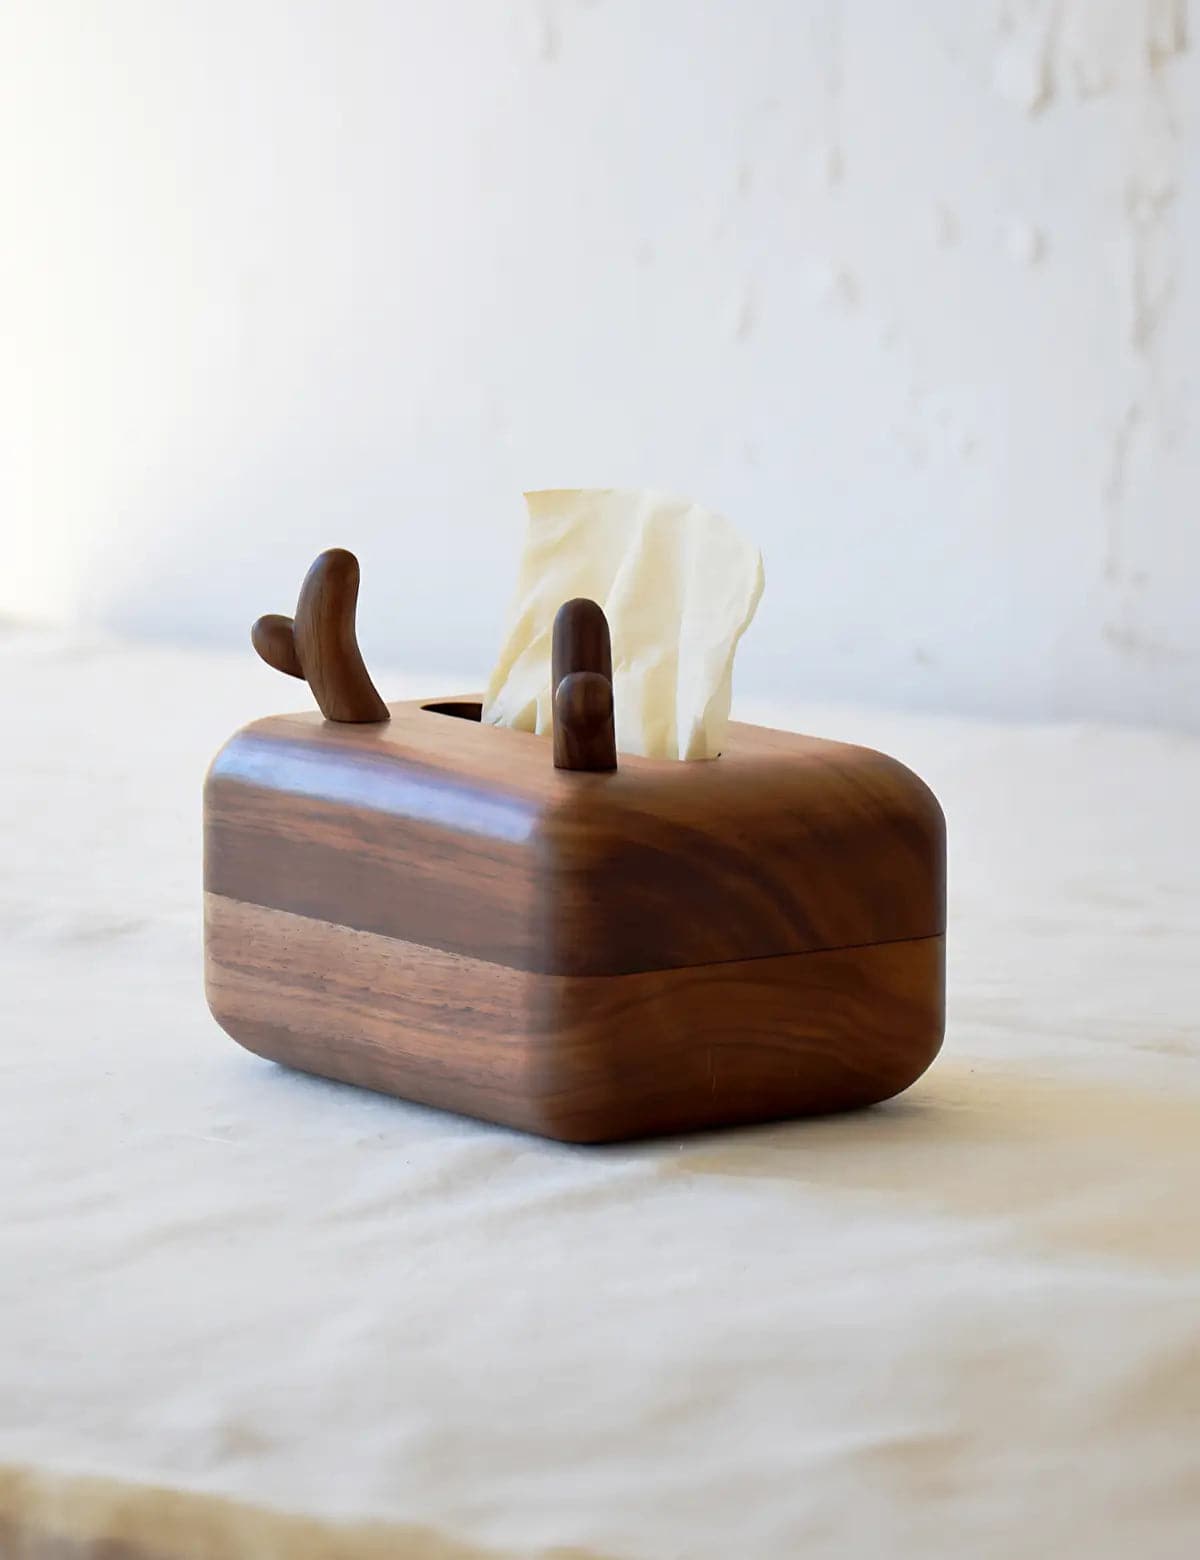 Wooden-Deer-Antler-Tissue-Box-Decorative-Home-Accessory-06